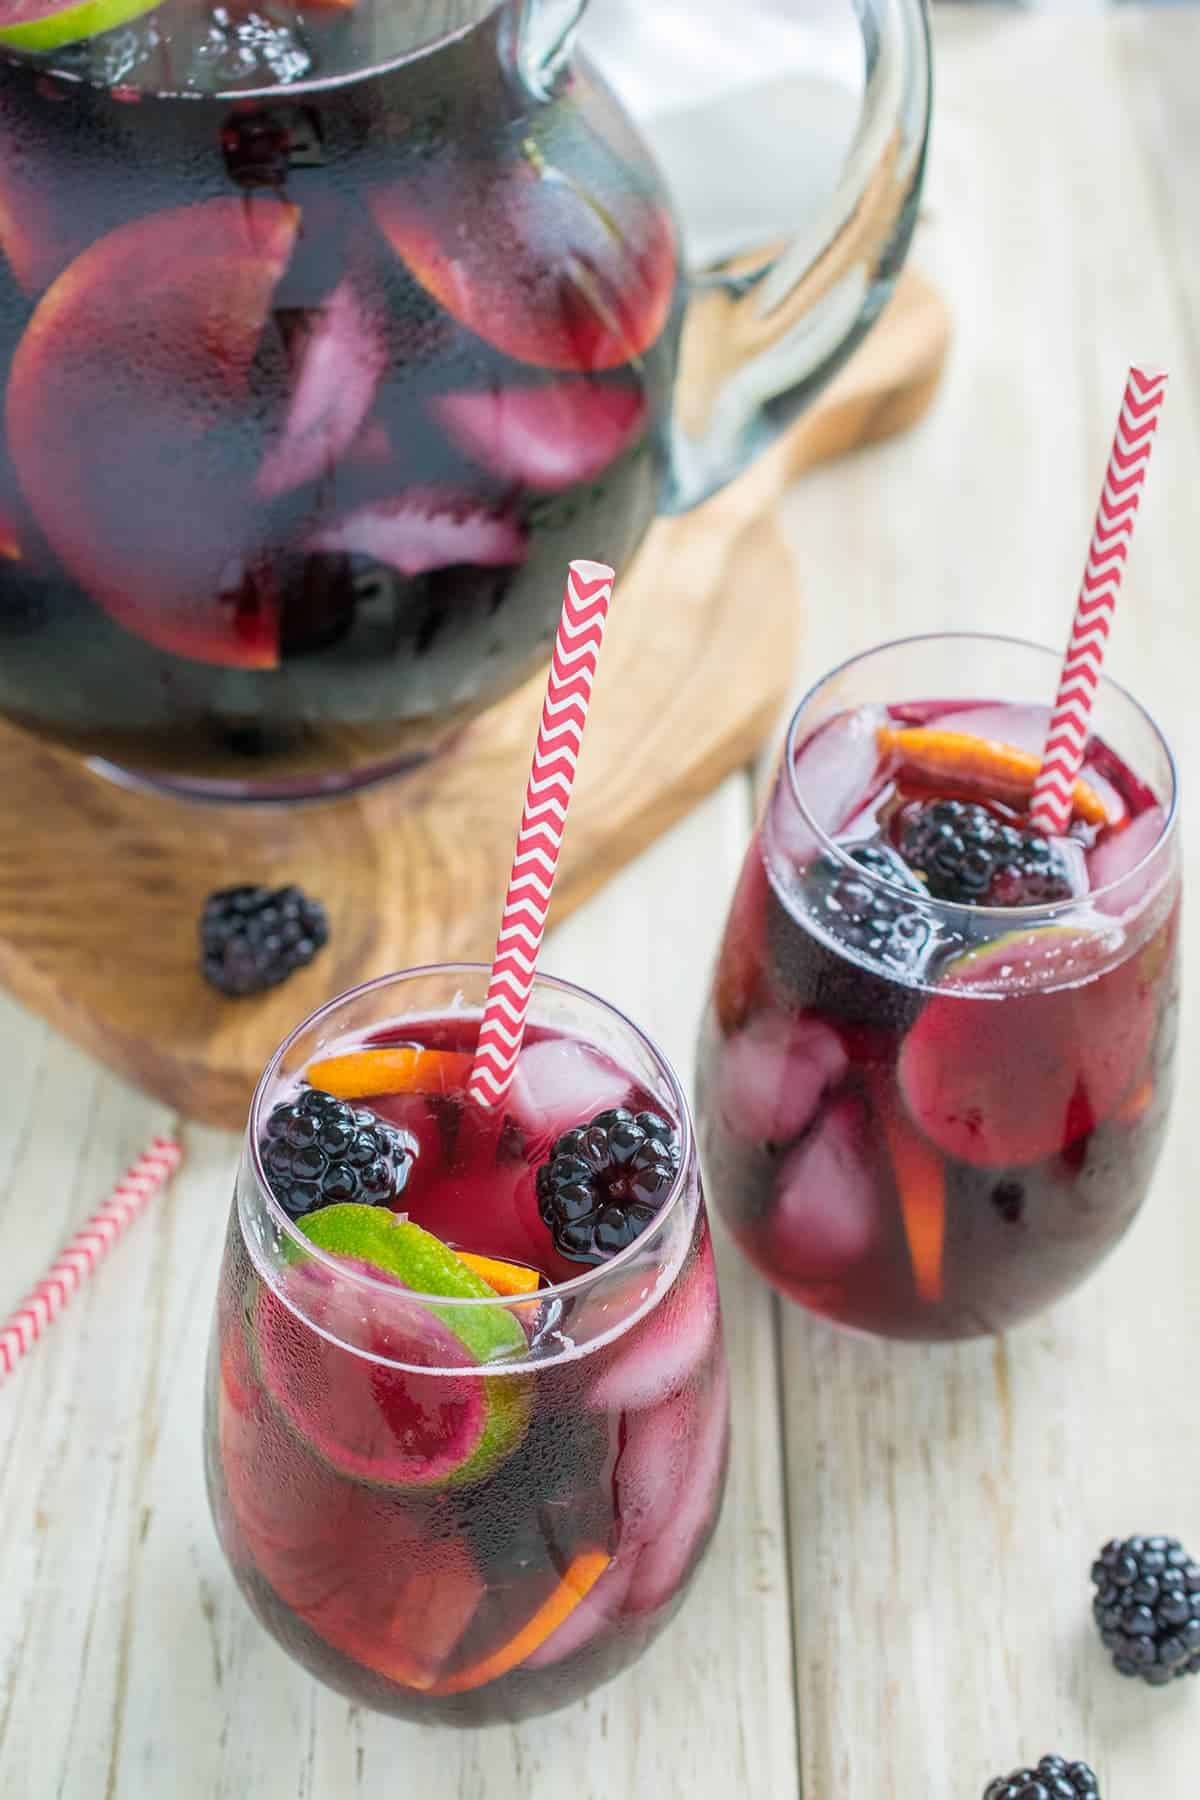 Glass pitcher of blackberry sangria on wooden paddle next to two wine glasses will with sangria and fresh sliced fruit.